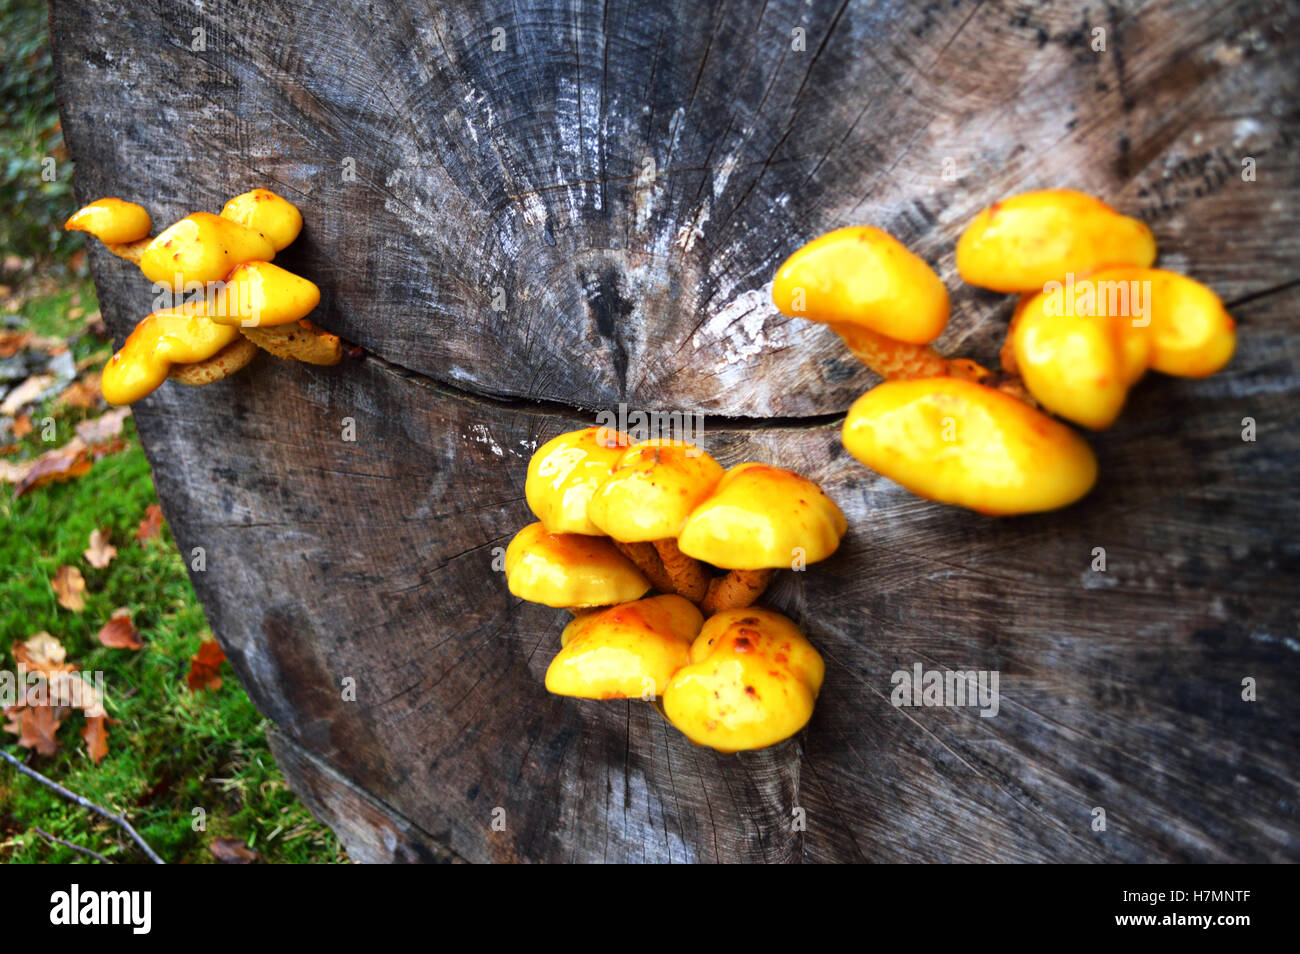 Sulphur tuft fungi (Hypholoma fasciculare) also known as clustered woodlovers growing on a tree stump in the New Forest, UK Stock Photo